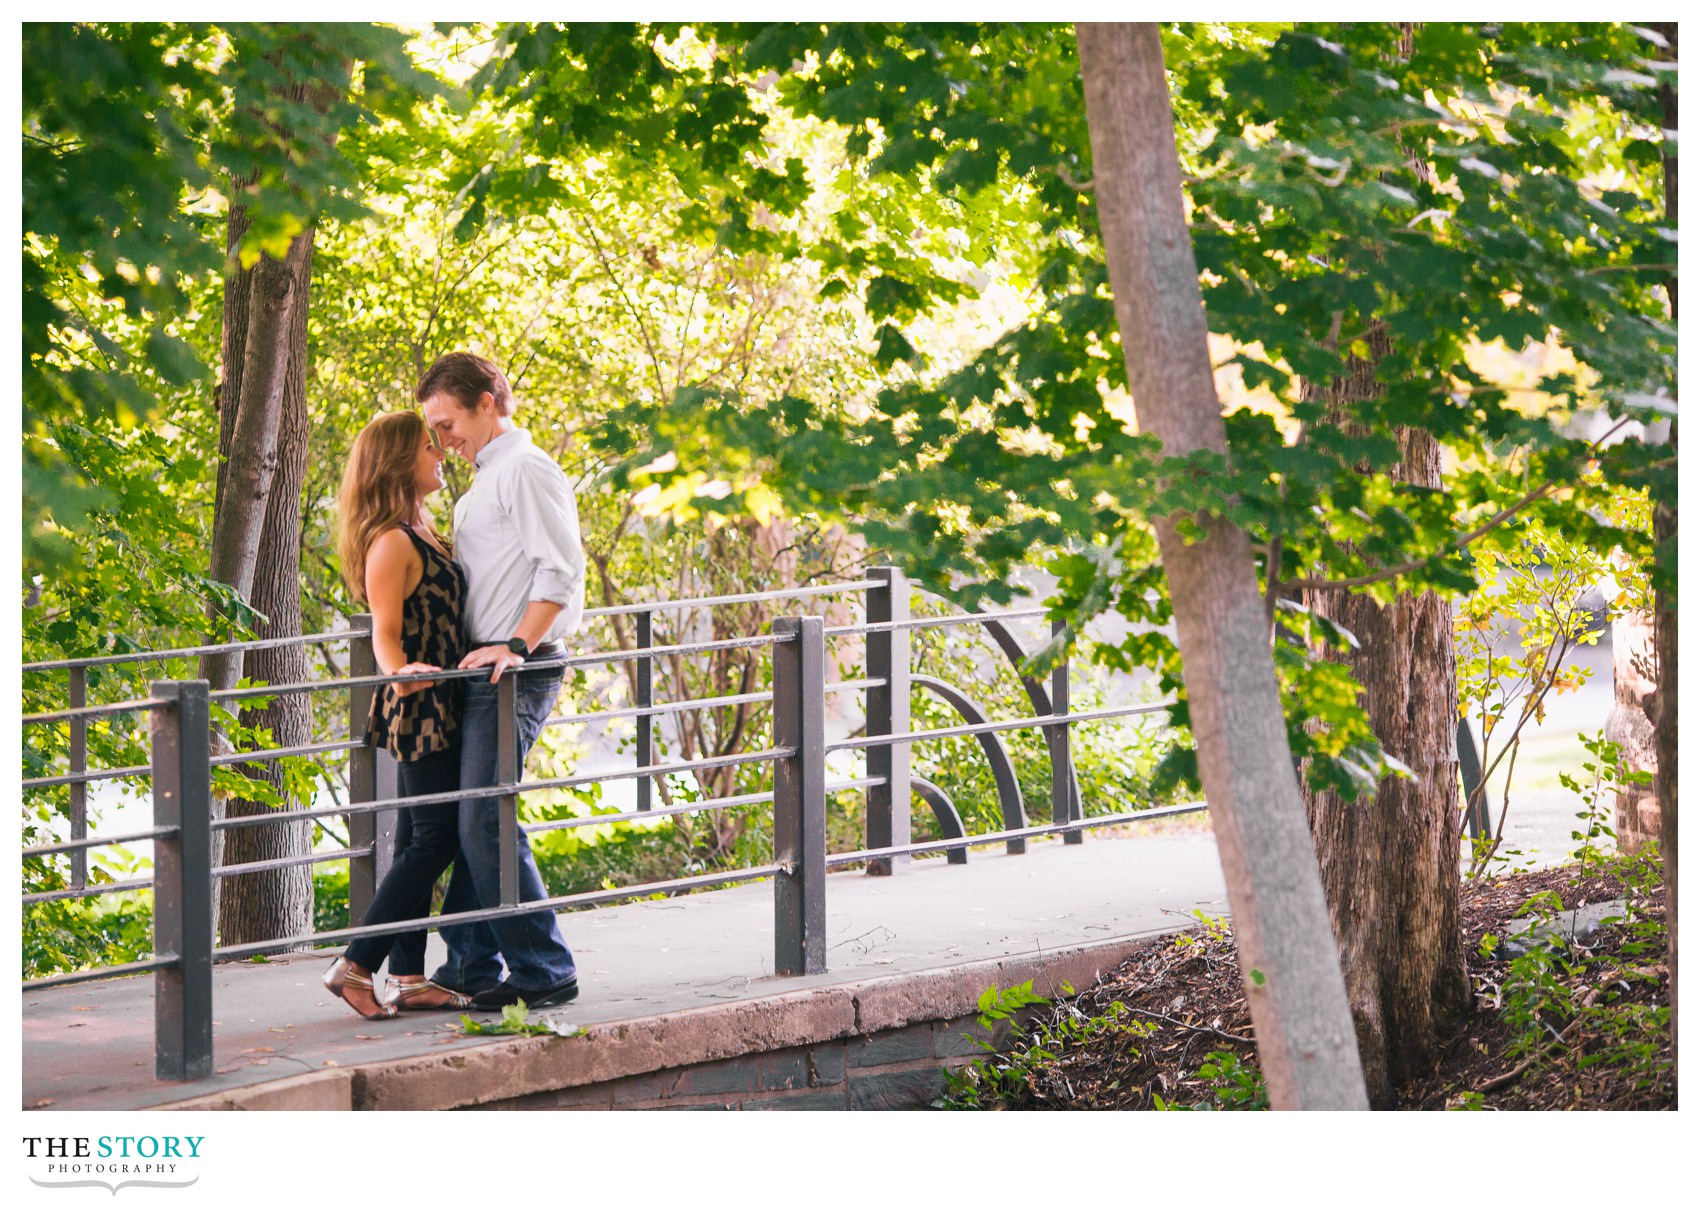 ithaca, ny engagement photos at Cornell